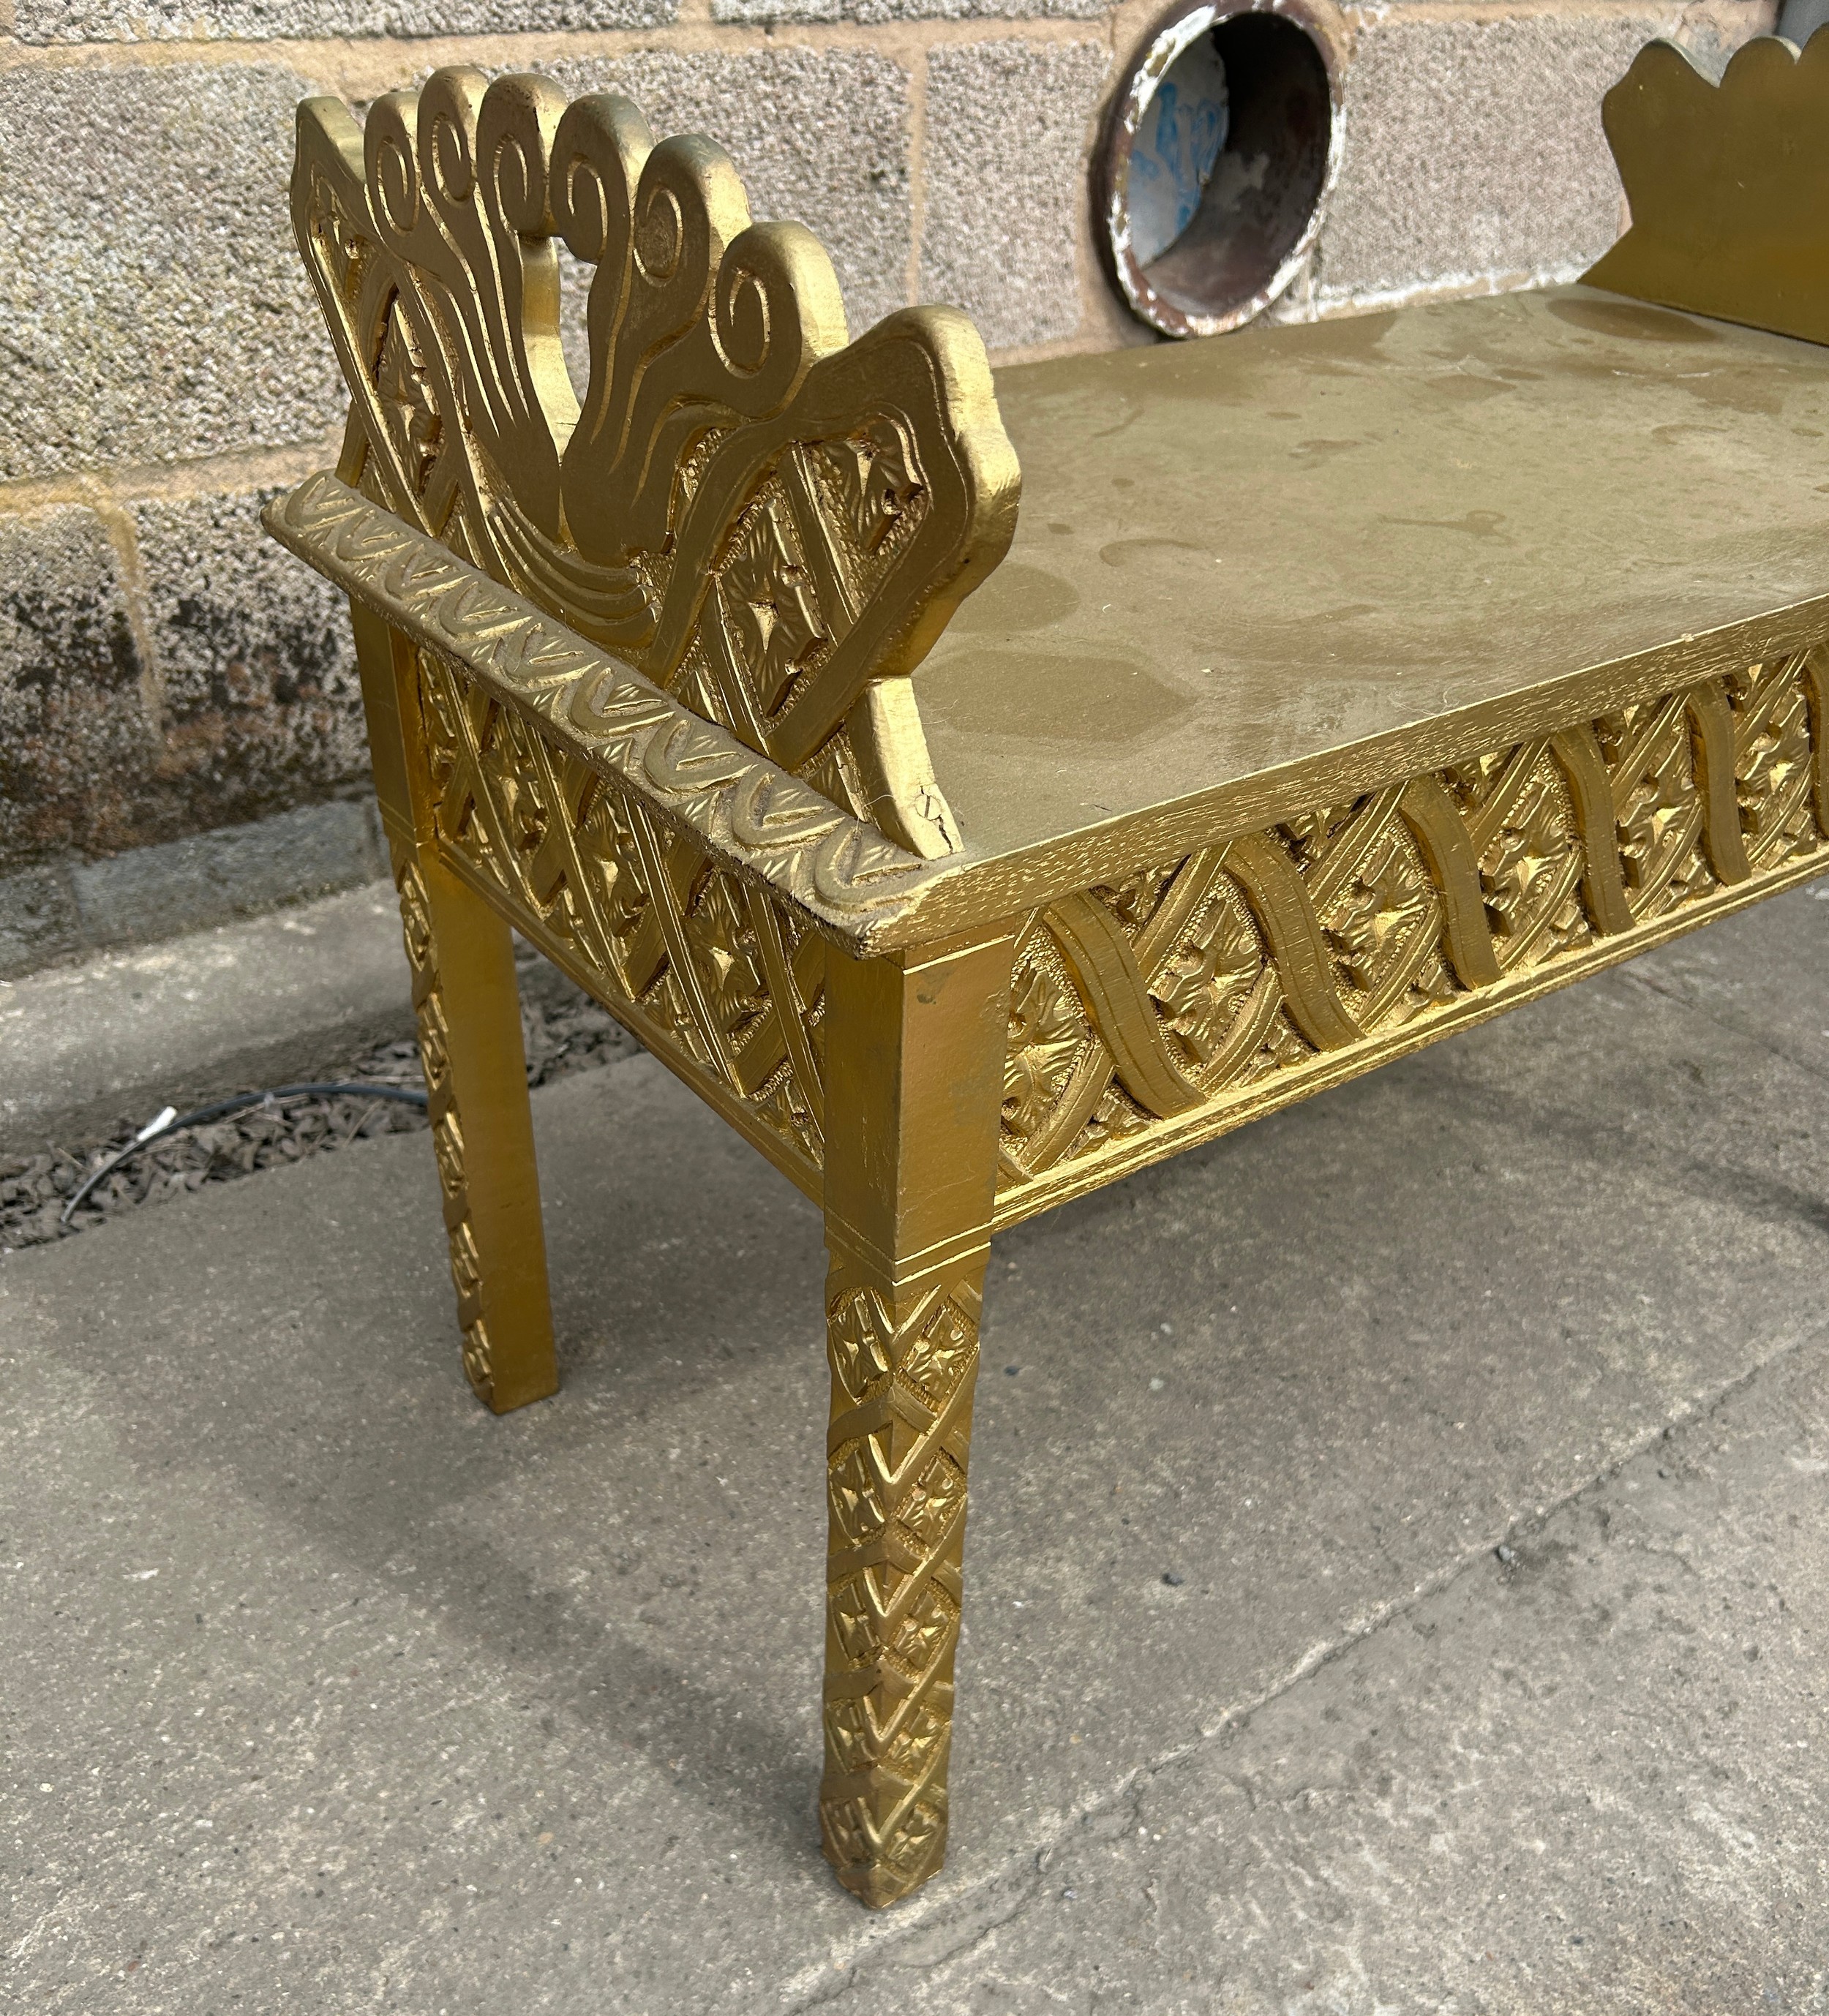 Gilded window seat measures approx 33 inches wide by 16 deep and 24 high - Image 2 of 3